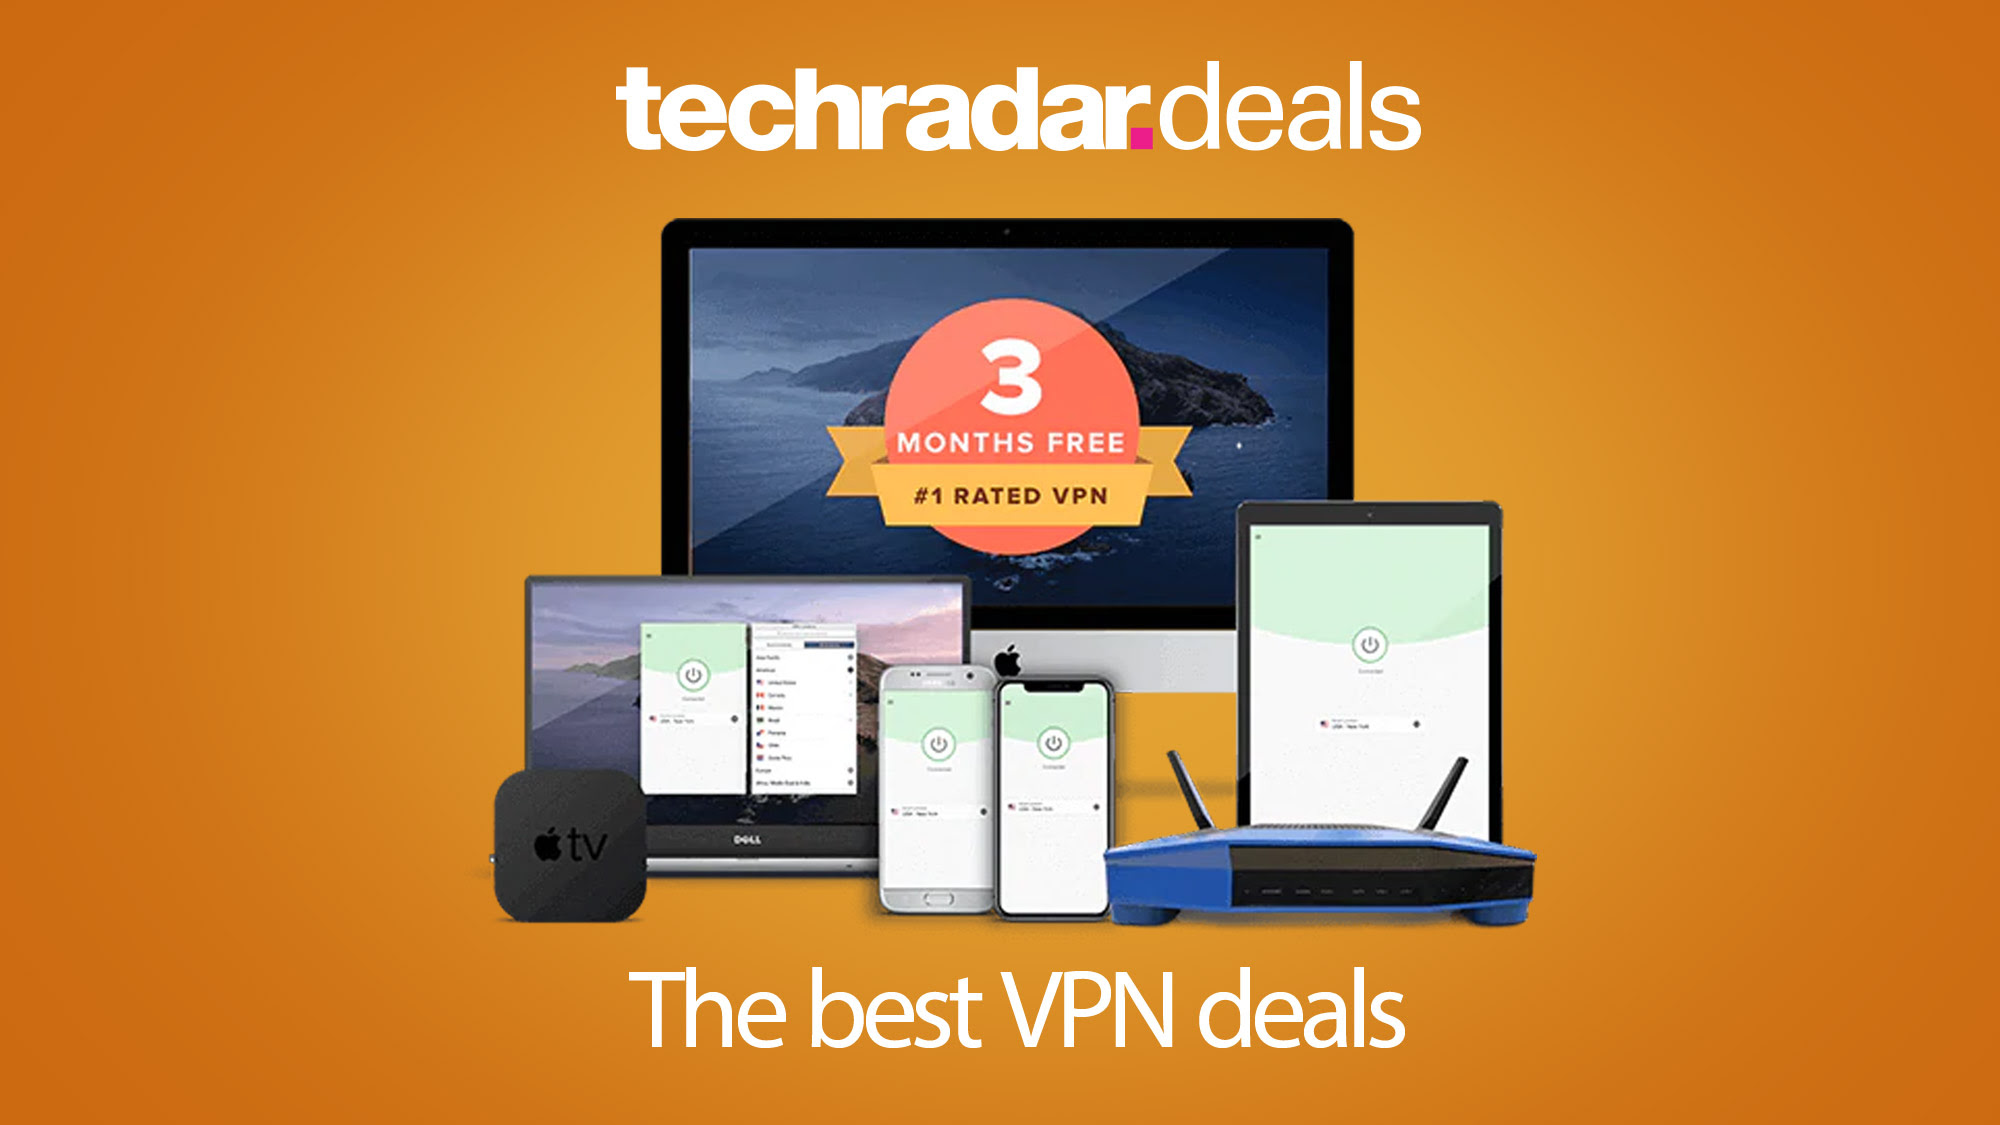 This week's best VPN Deals - get the best price on privacy and unblocking